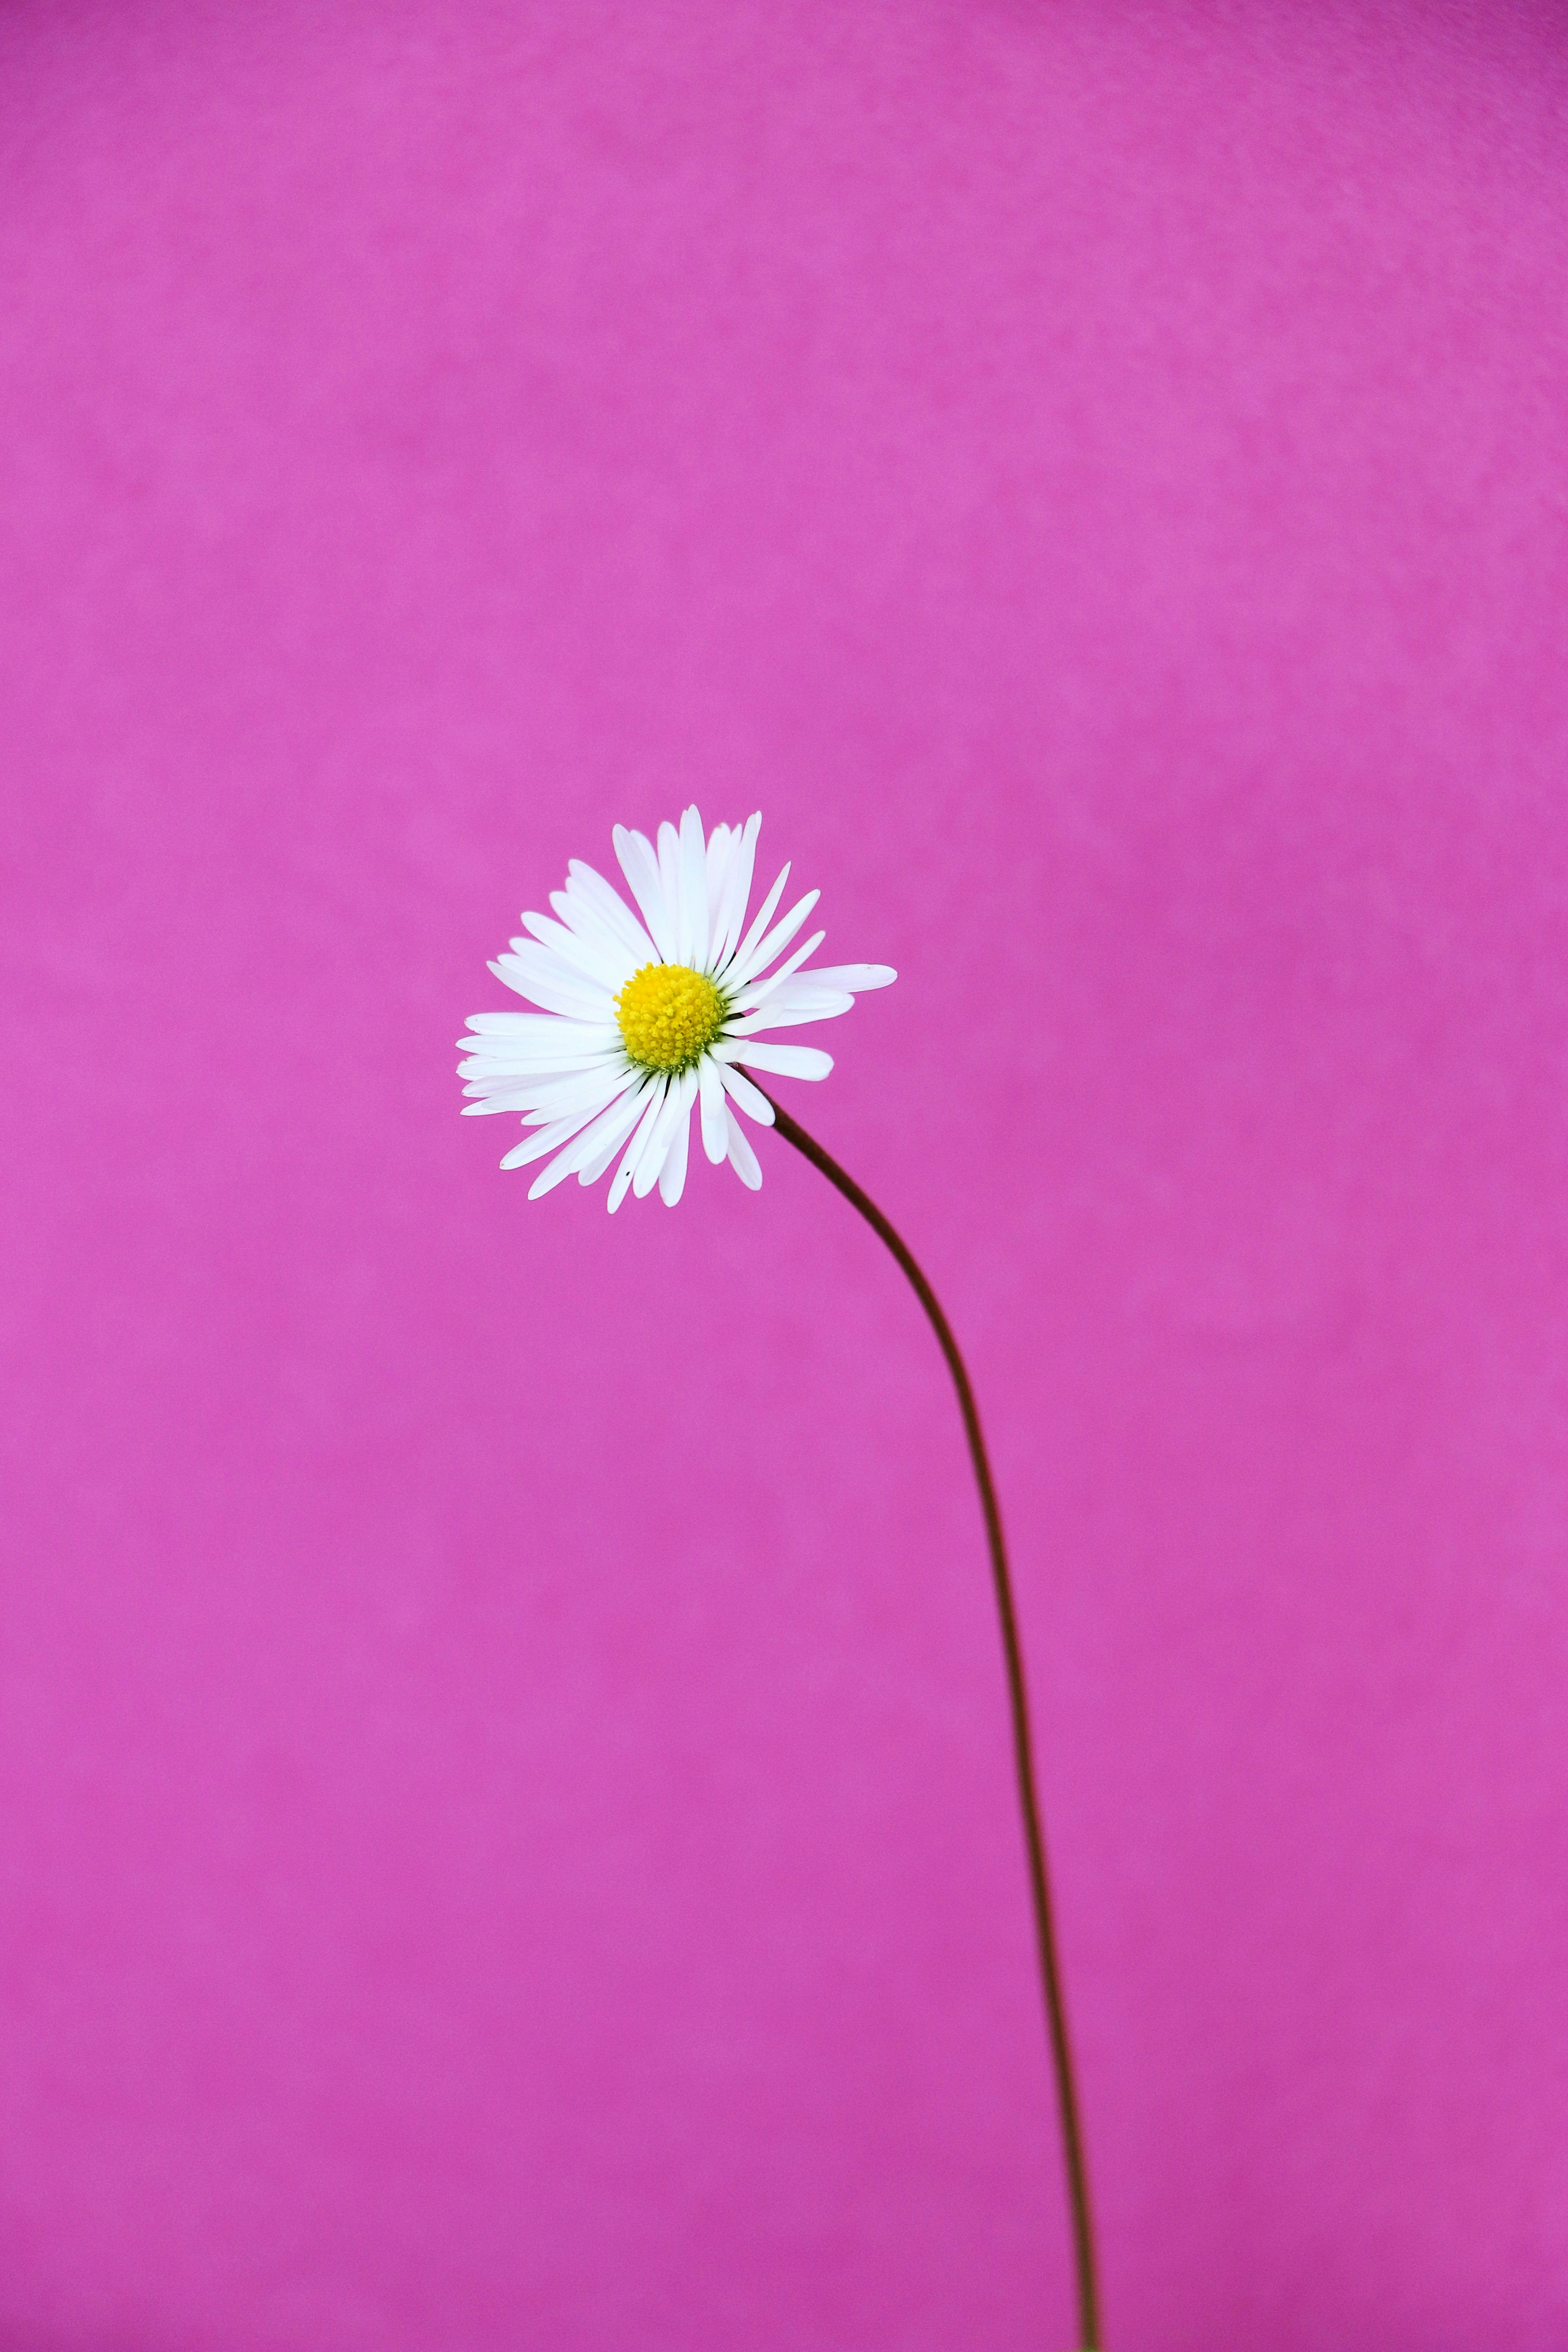 500 Daisy Pictures Download Free Images On Unsplash